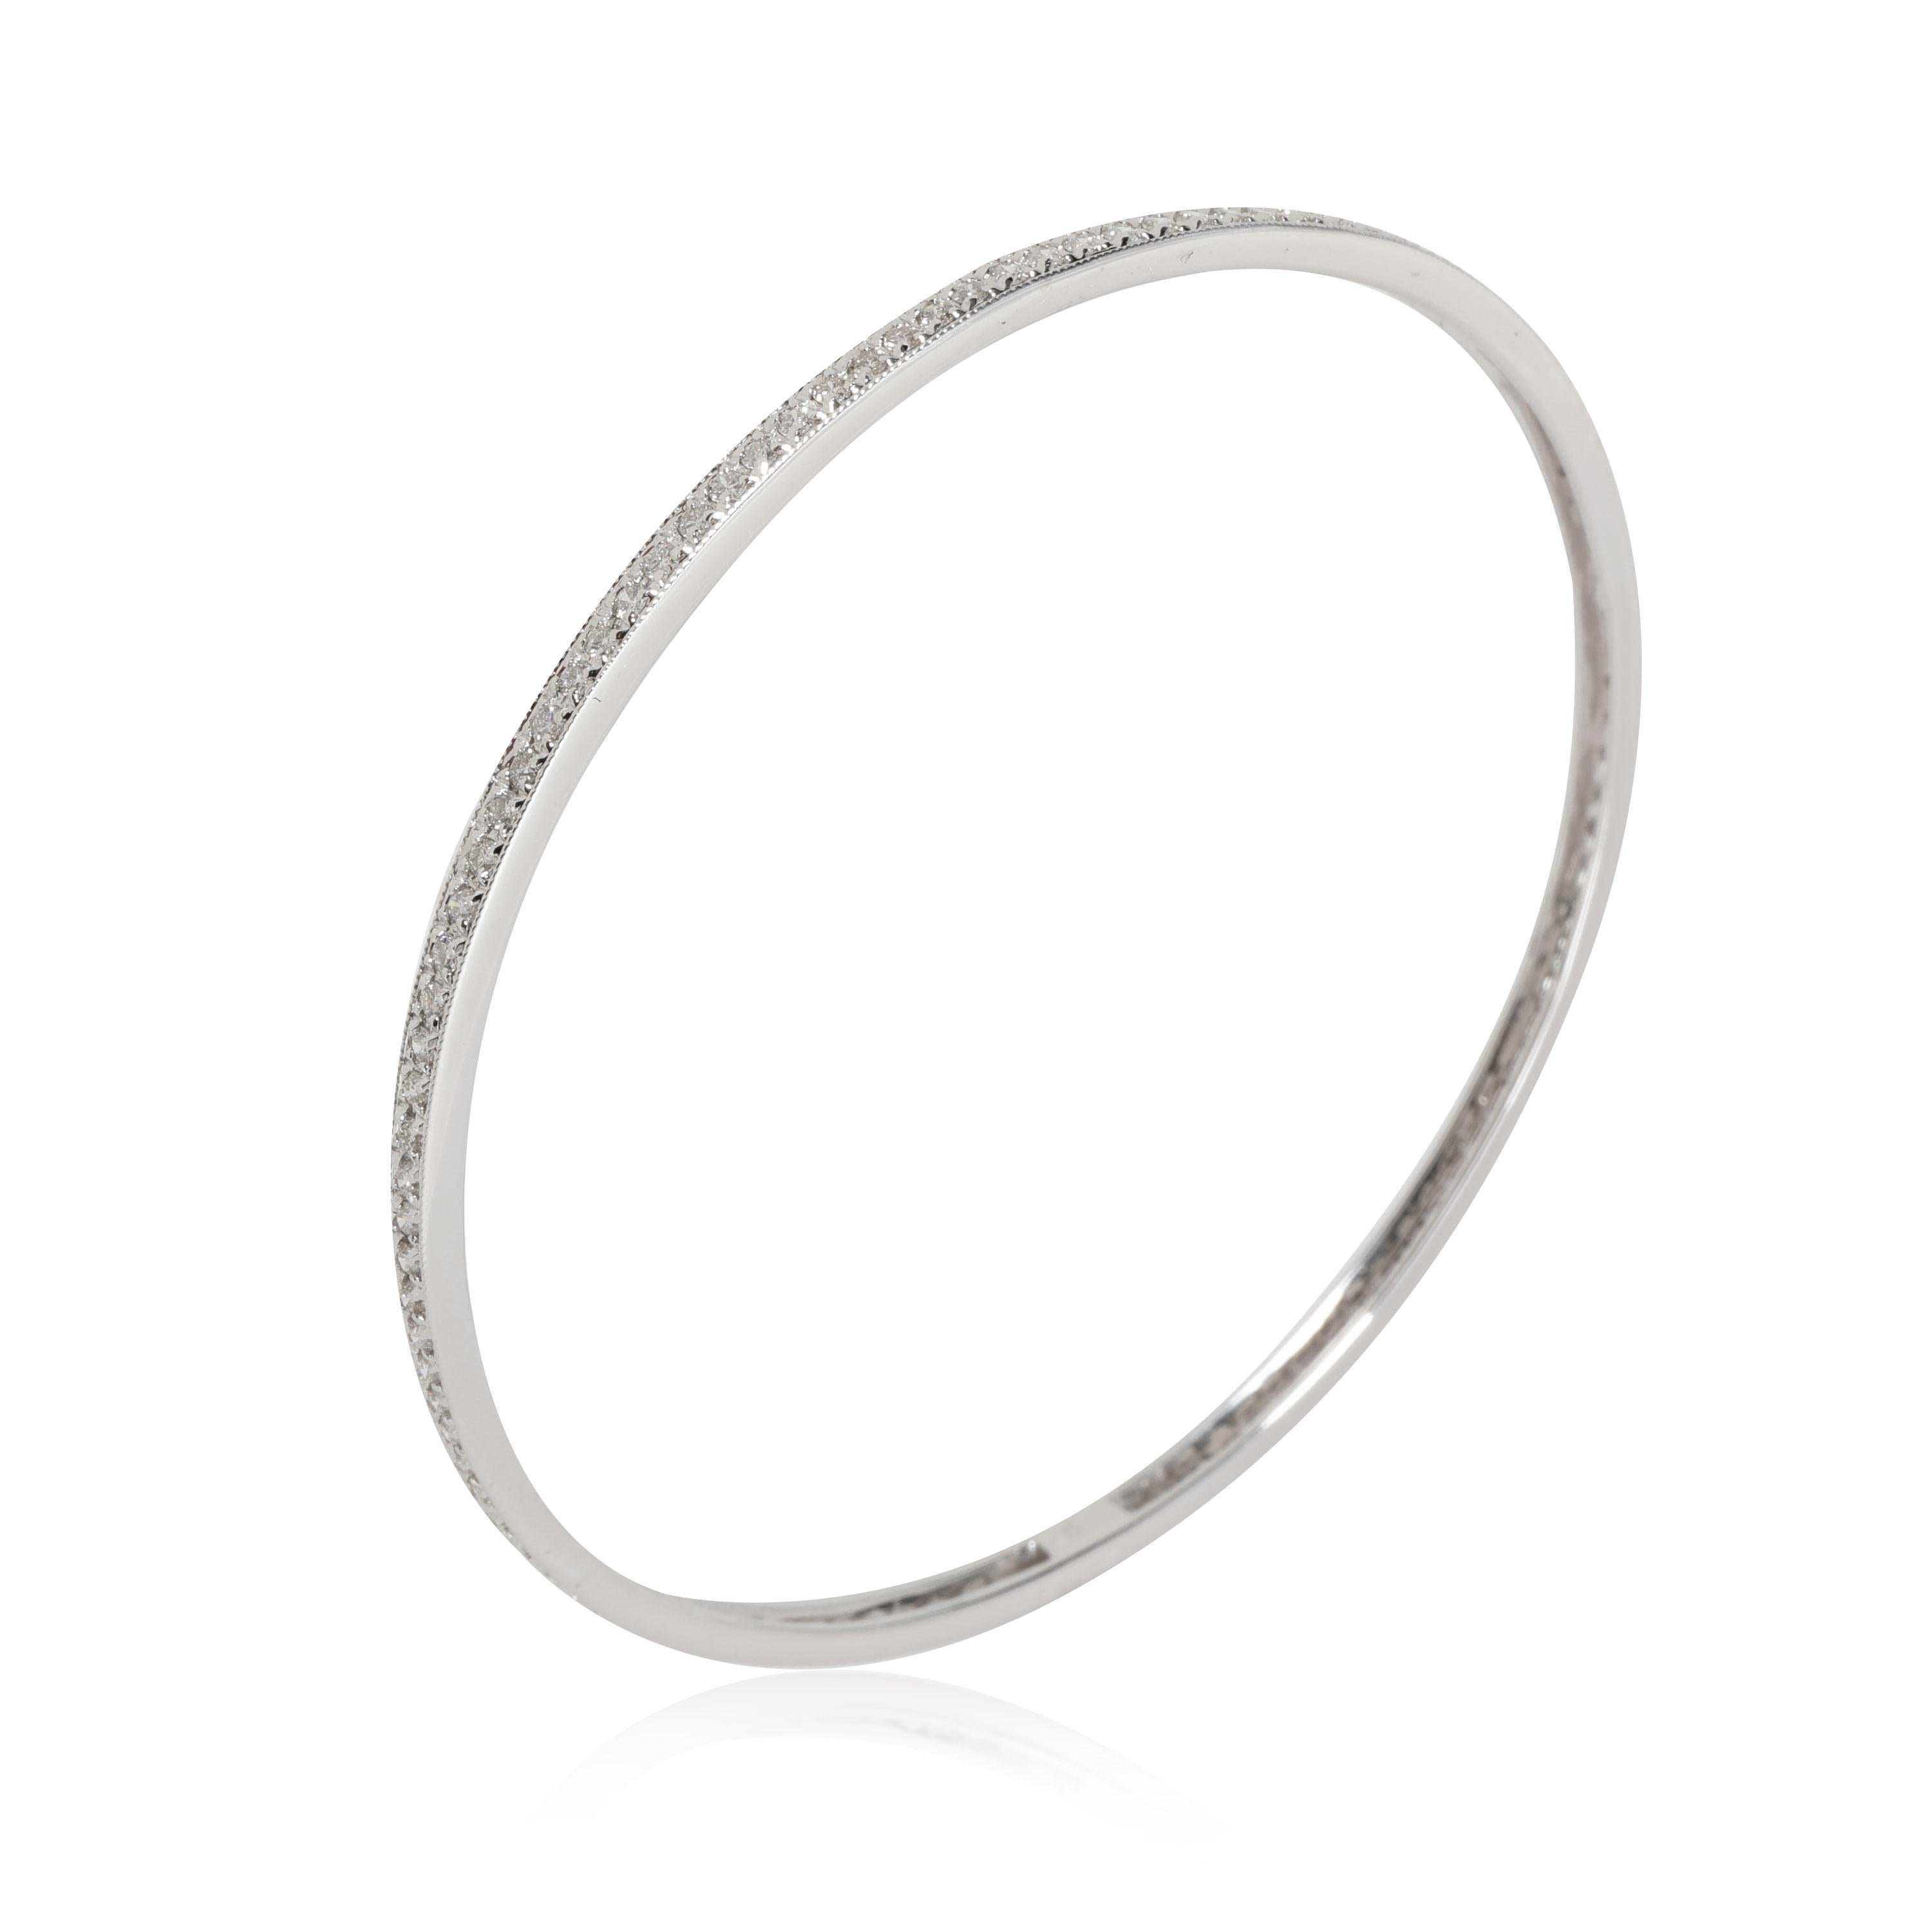 Diamond Slip On Bangle in 18k White Gold 1.75 CTW
 
 PRIMARY DETAILS
 SKU: 117275
 Listing Title: Diamond Slip On Bangle in 18k White Gold 1.75 CTW
 Condition Description: Retails for 2995 USD. In excellent condition and recently polished. Fits a